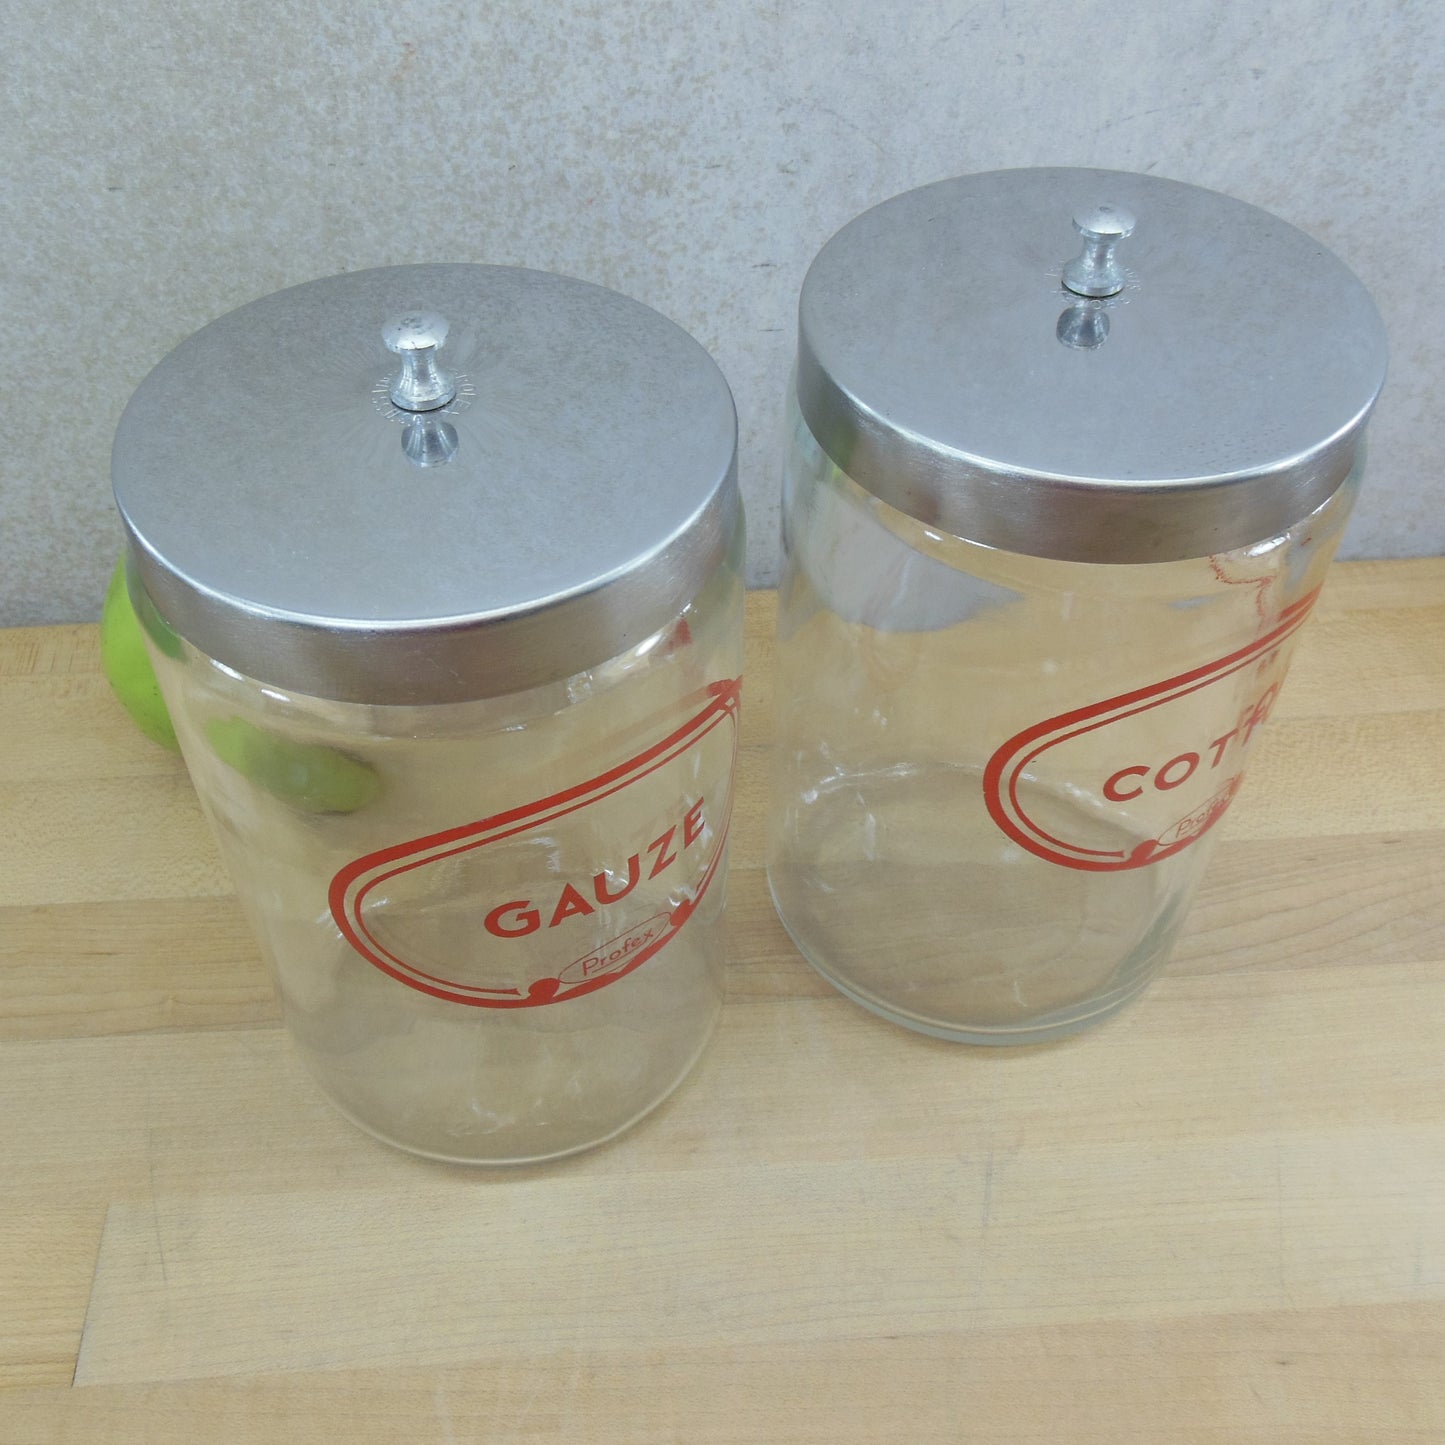 Profex Gauze Cotton Red Label Medical Glass Jars Containers Stainless Lids